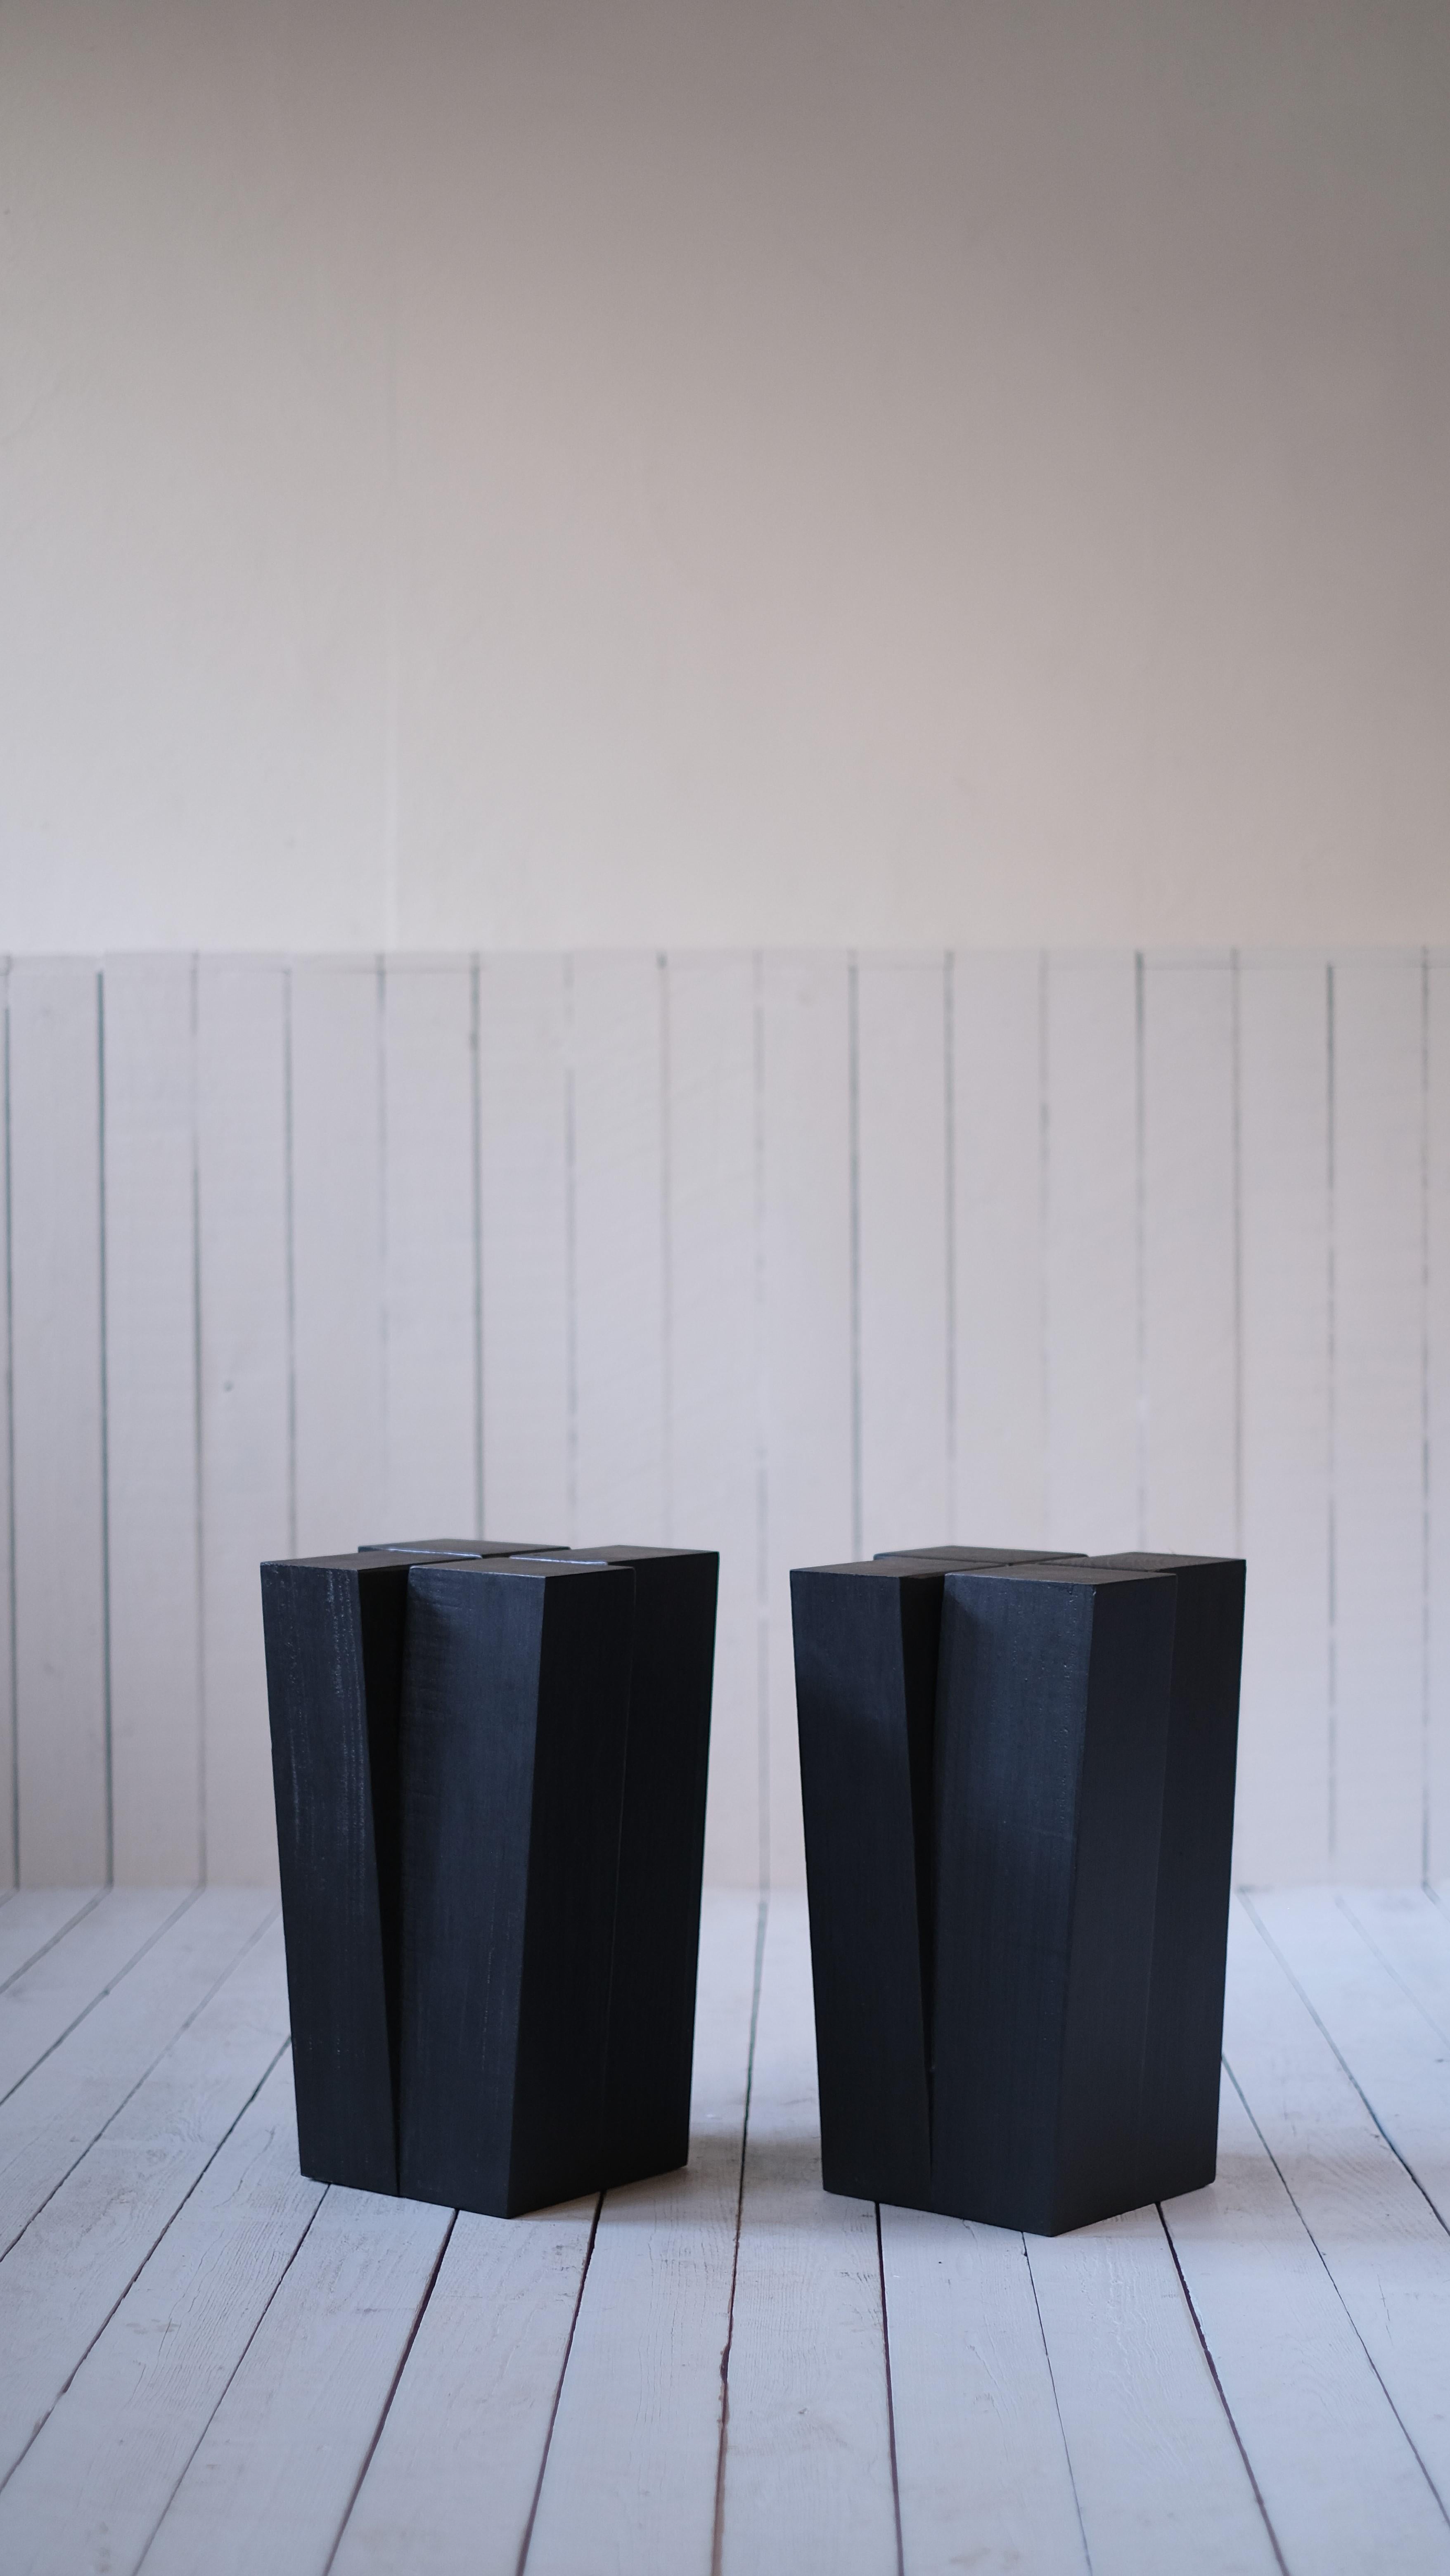 Four Legs Stool by Declercq
Dimensions: D32 x W32 x H50 cm
Materials:  Burned and waxed Iroko wood

Signed by Arno Declercq

Arno Declercq
Belgian designer and art dealer who makes bespoke objects with passion for design, atmosphere, history and